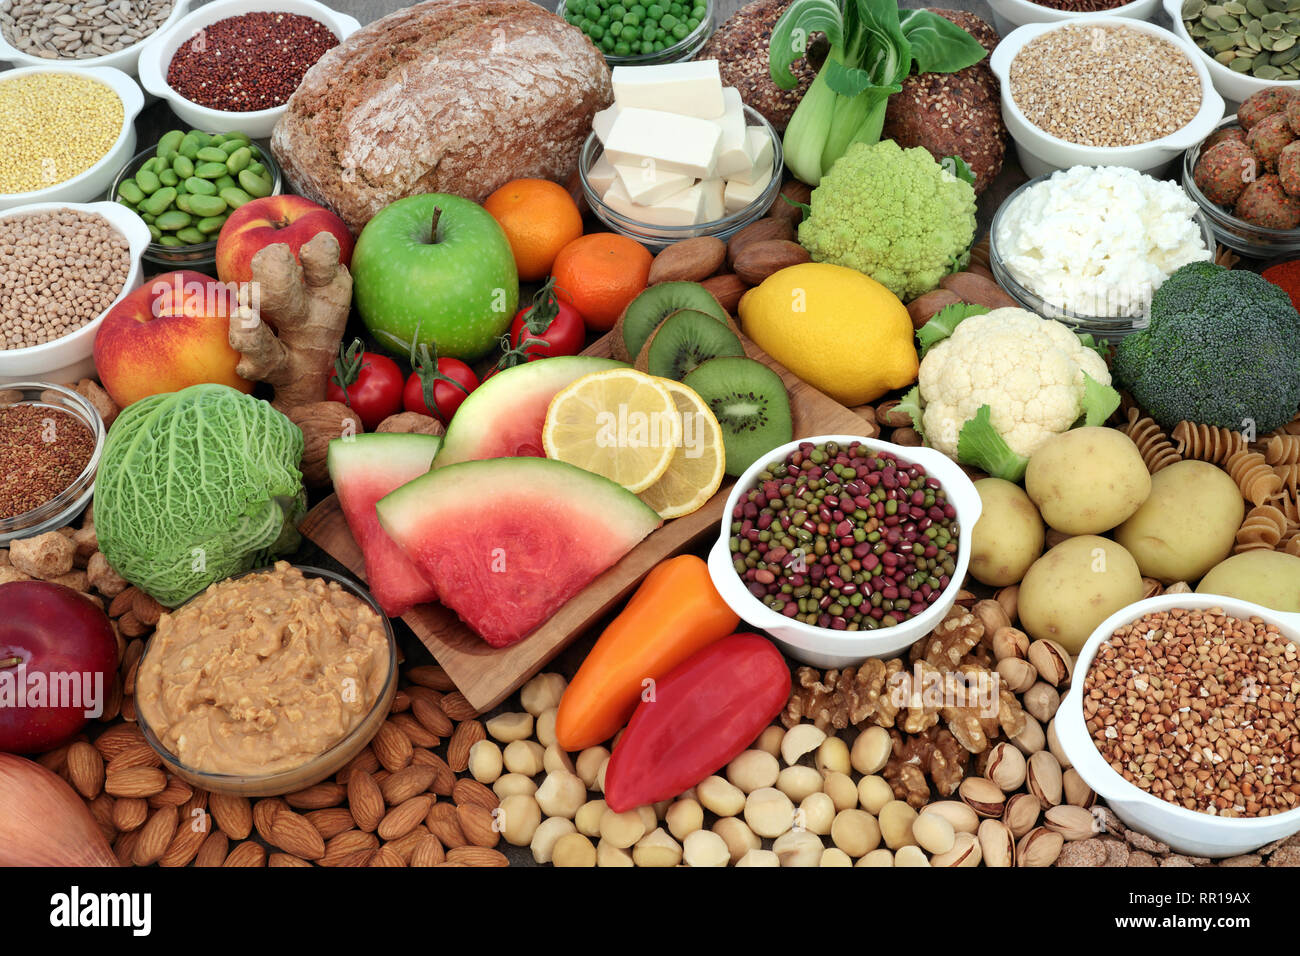 Large vegan health food selection with fruit, vegetables, bean curd,  legumes, nuts, pasta, cereals, bread, grains, almond yoghurt & peanut  butter Stock Photo - Alamy